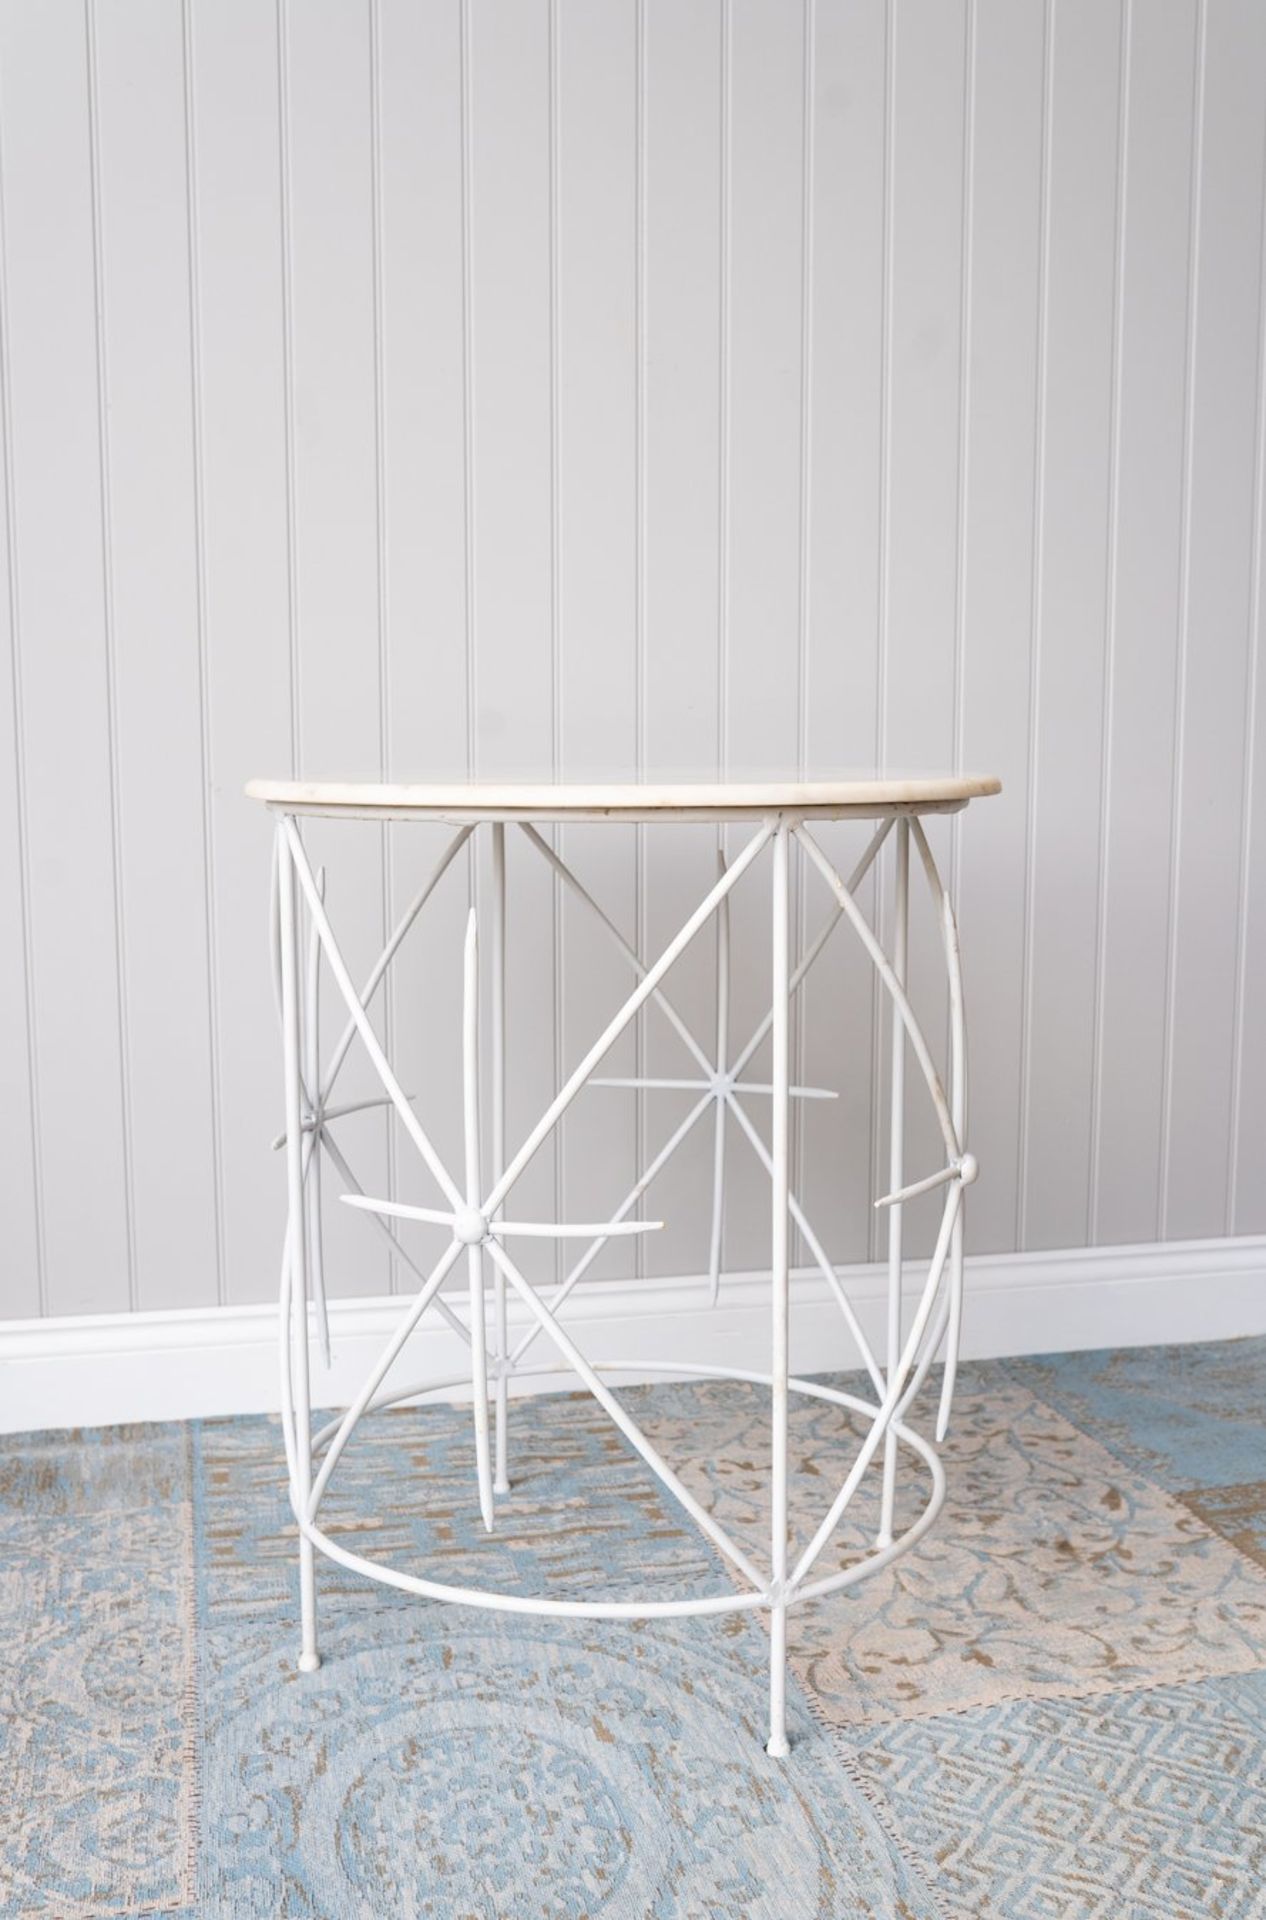 Side Table - White and White Distress: A gorgeous large side table finished in a bright white - Image 2 of 2